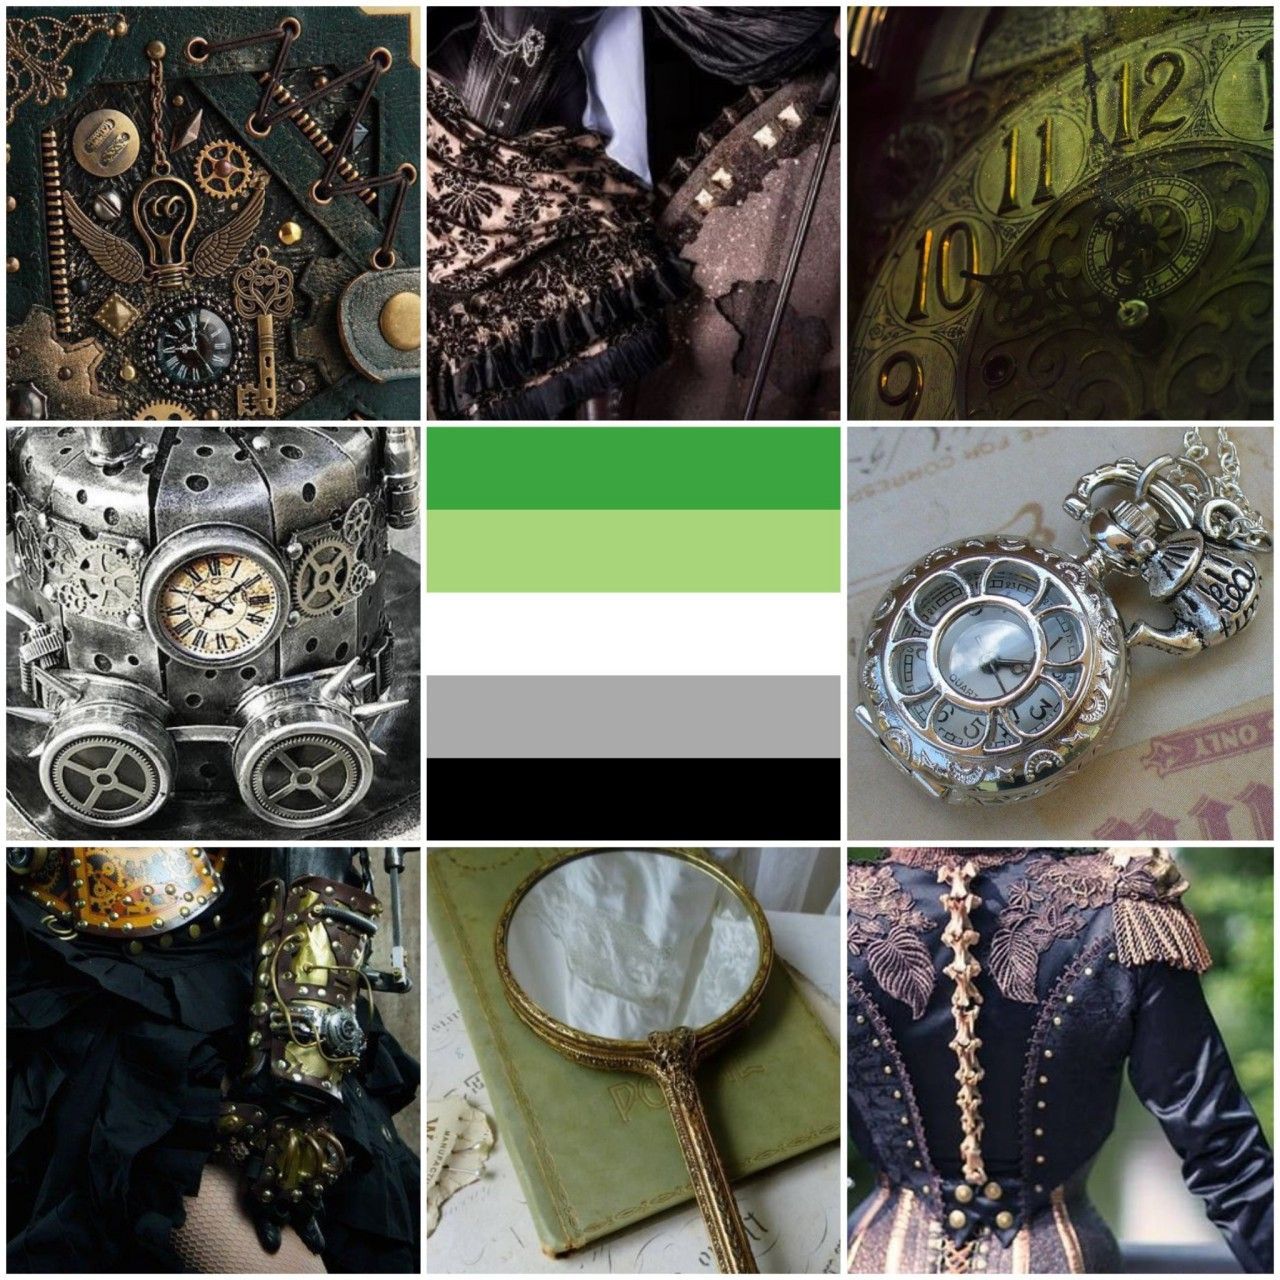 A collage of steampunk images with the agender flag. - Steampunk